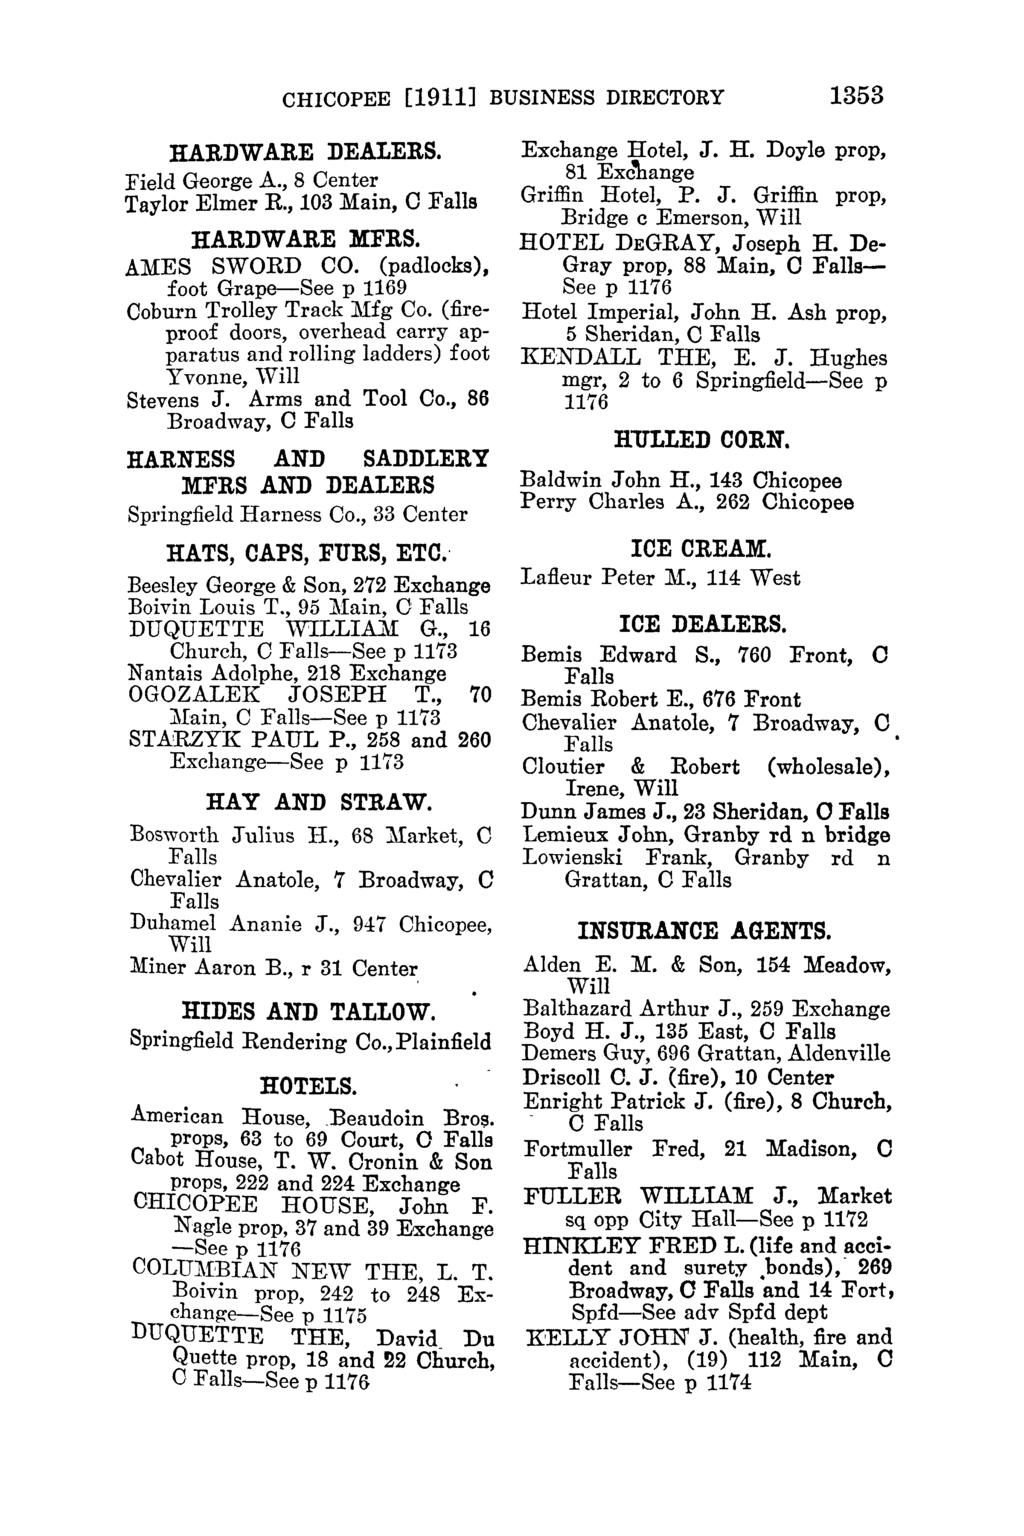 CHICOPEE [1911] BUSINESS DIRECTORY 1353 HARDWARE DEALERS. Field George A., 8 Center Taylor Elmer R., 103 Main, HARDWARE MFRS. AMES SWORD CO.